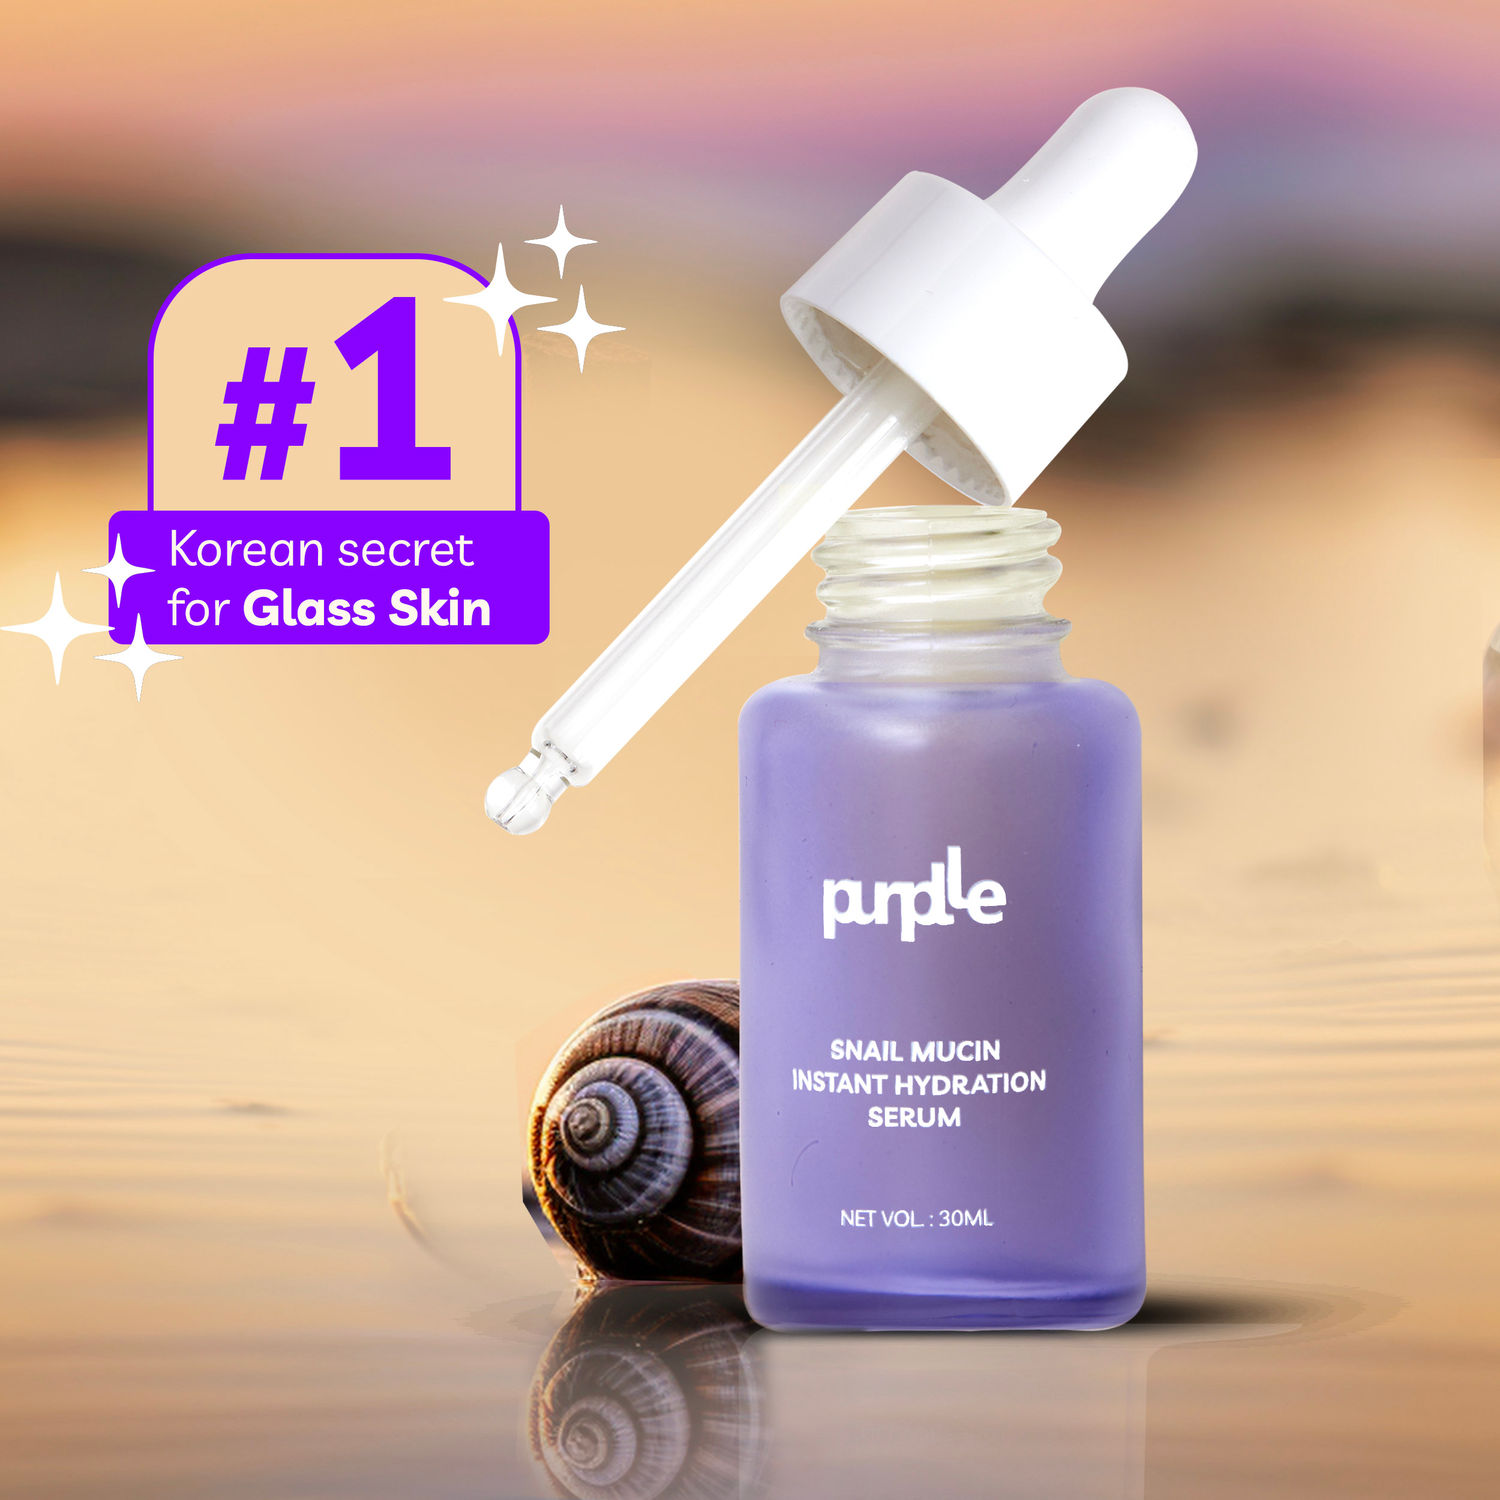 Buy Purplle Snail Mucin Instant Hydration Serum | All Skin Types | Anti-acne | Non-Sticky | Anti-aging | Collagen Production | Reduces Wrinkles | Glass Skin | Lightweight (30 ml) - Purplle